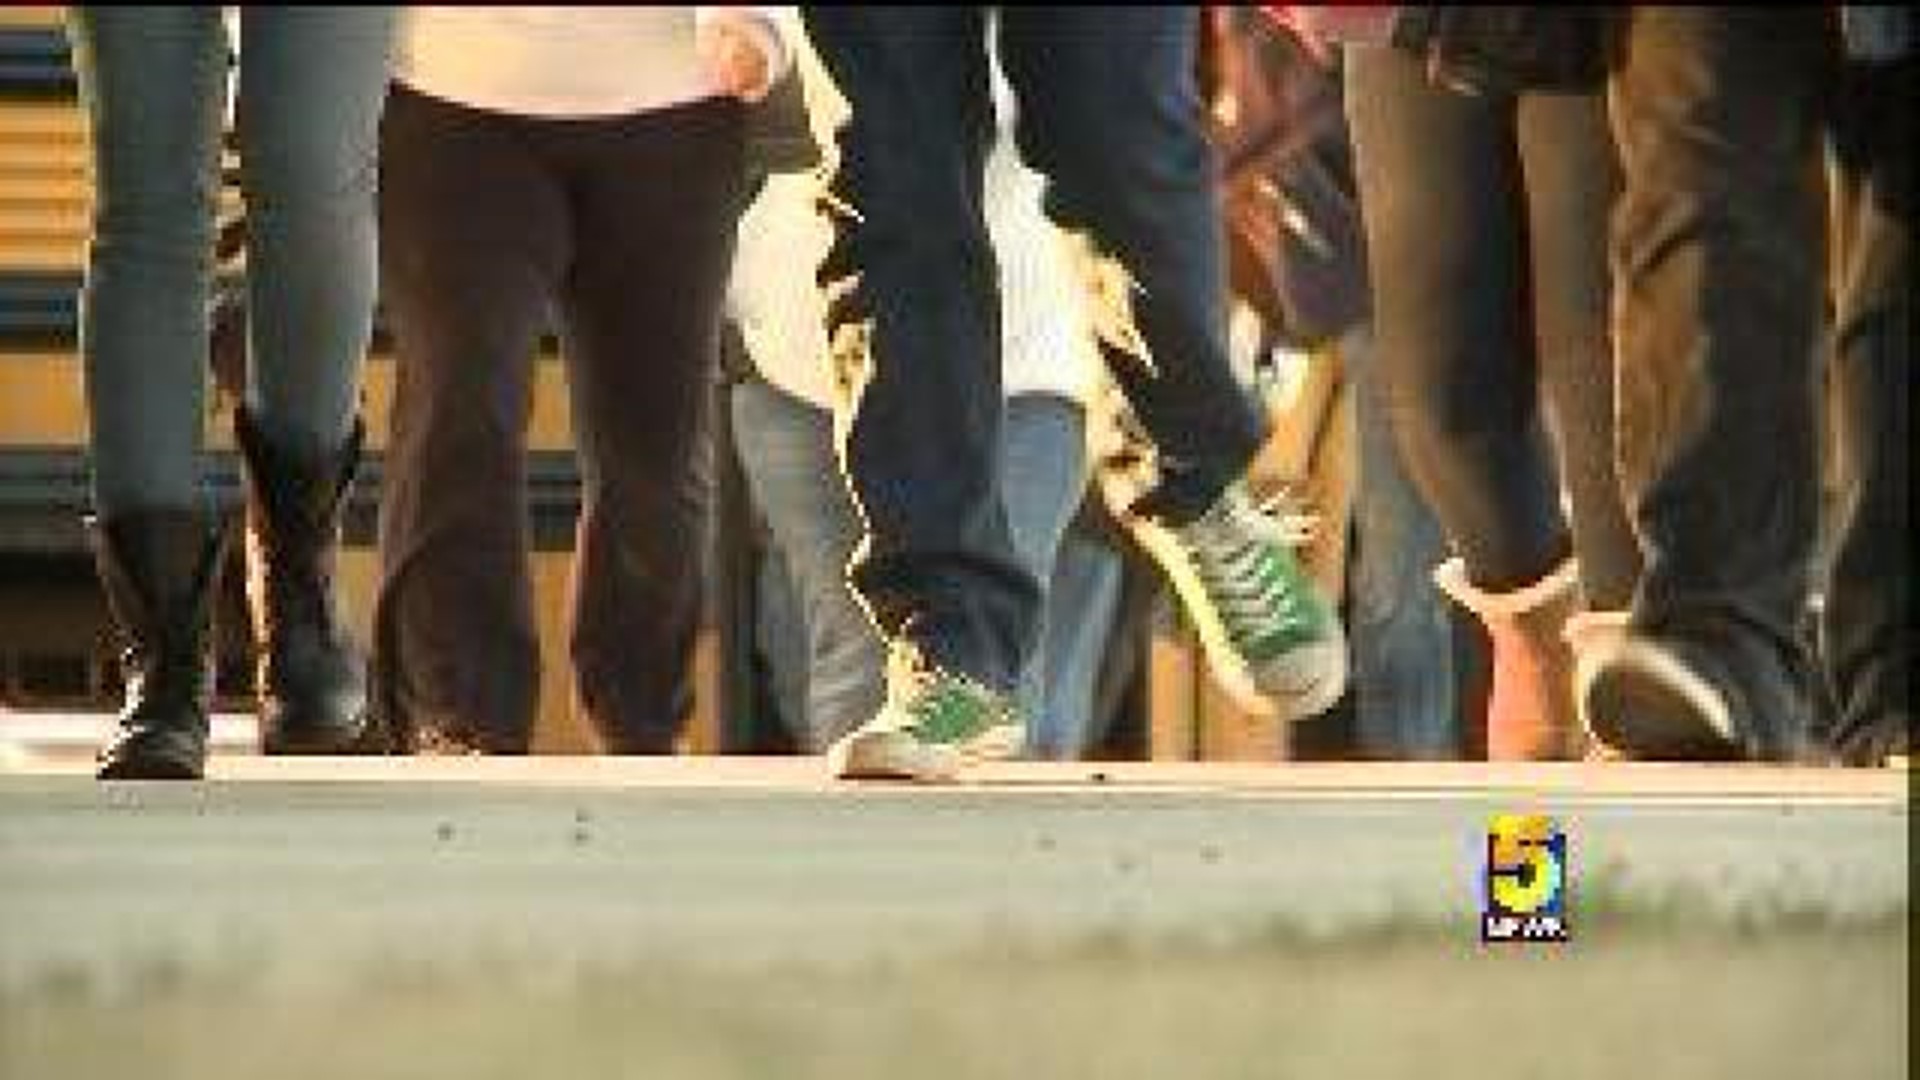 Fayetteville High Students Go To School After Bomb Scare